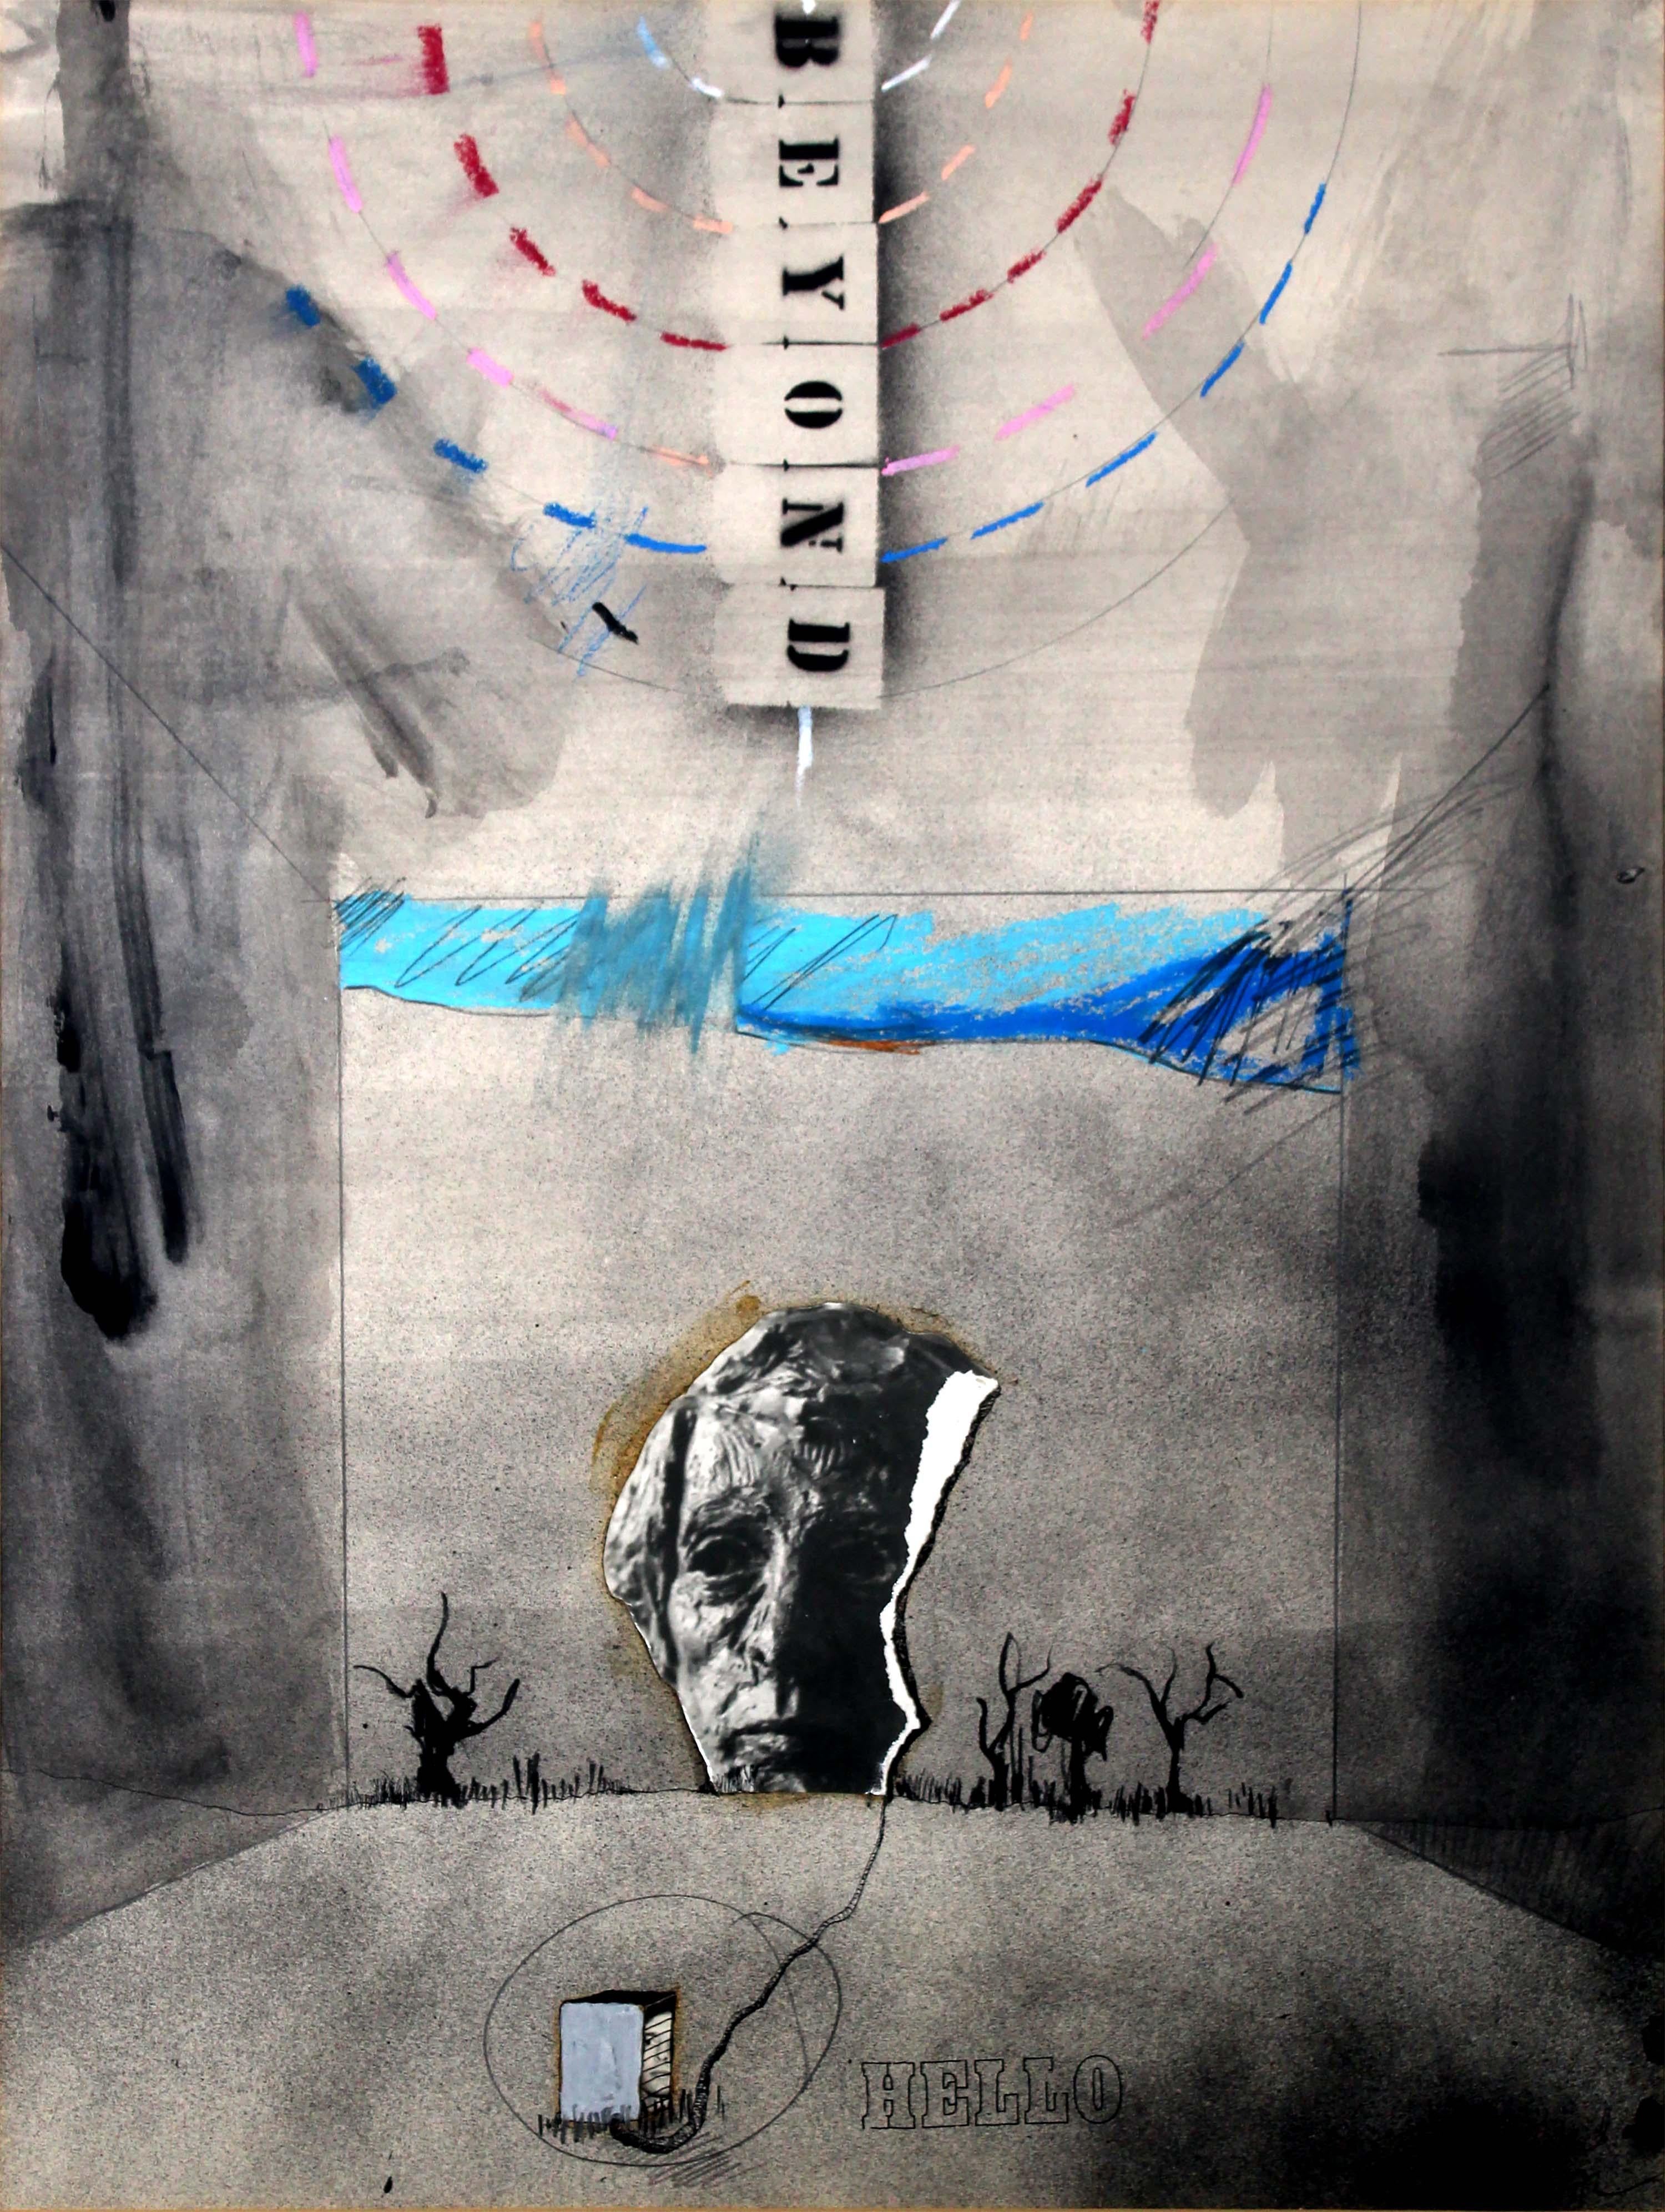 An intriguing modern collage drawing titled 